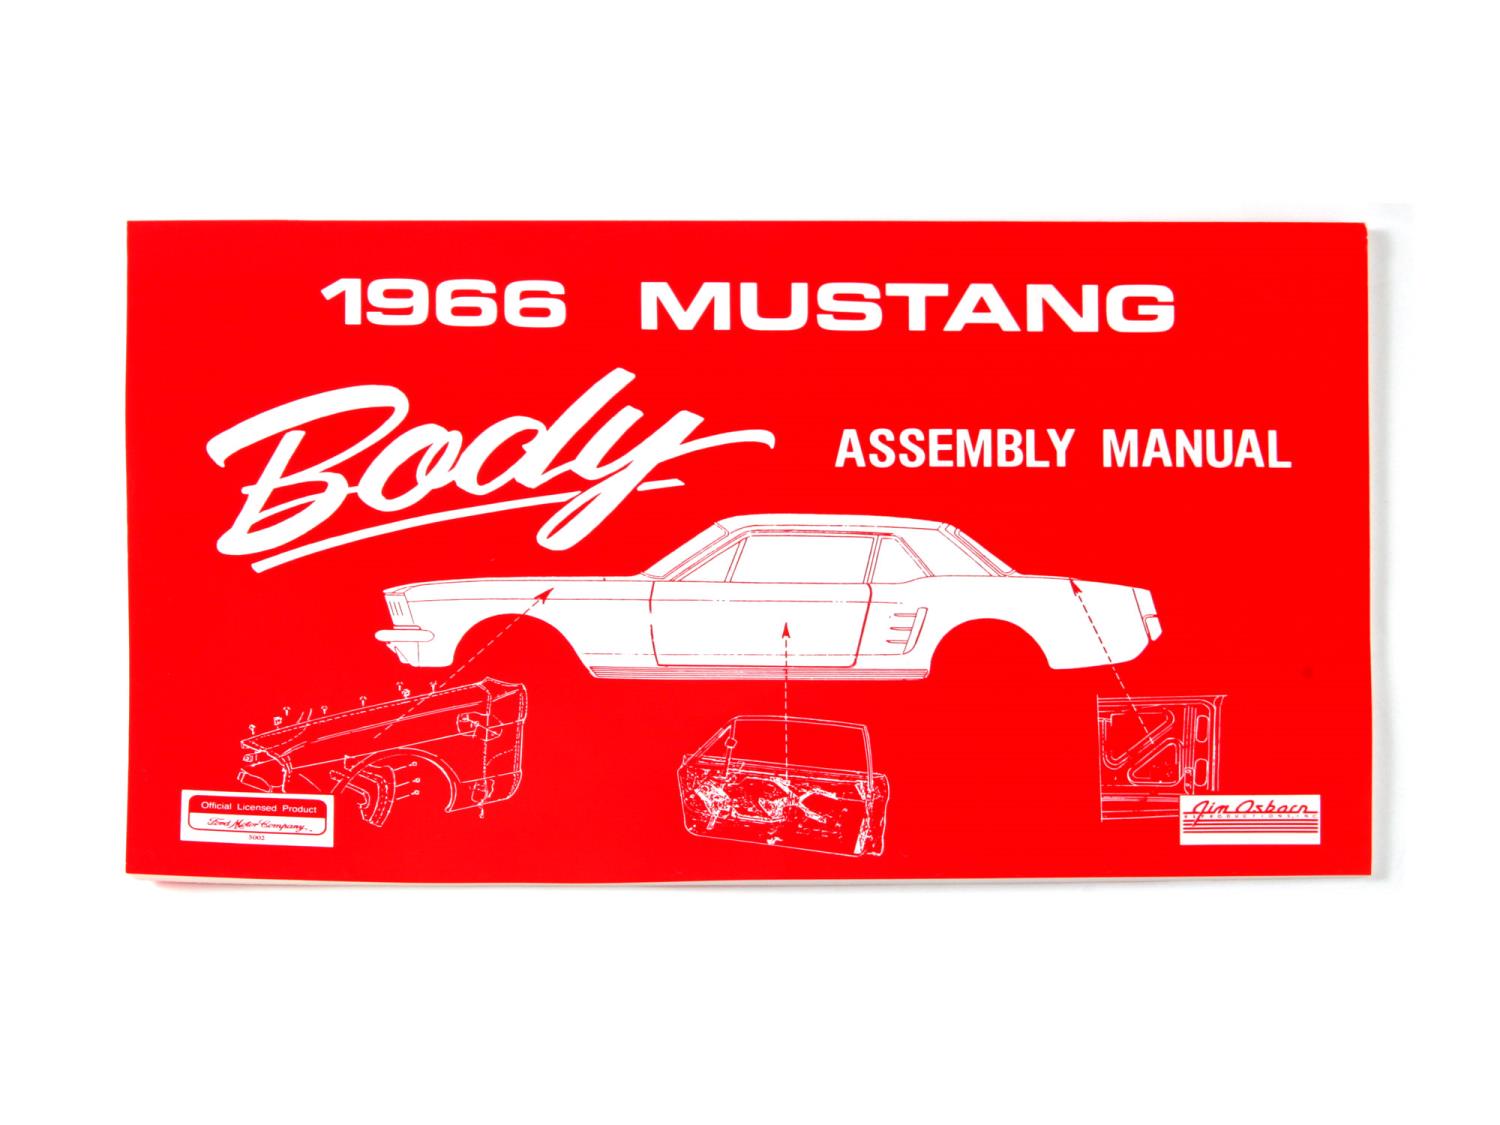 Body Assembly Manual for 1966 Ford Mustang